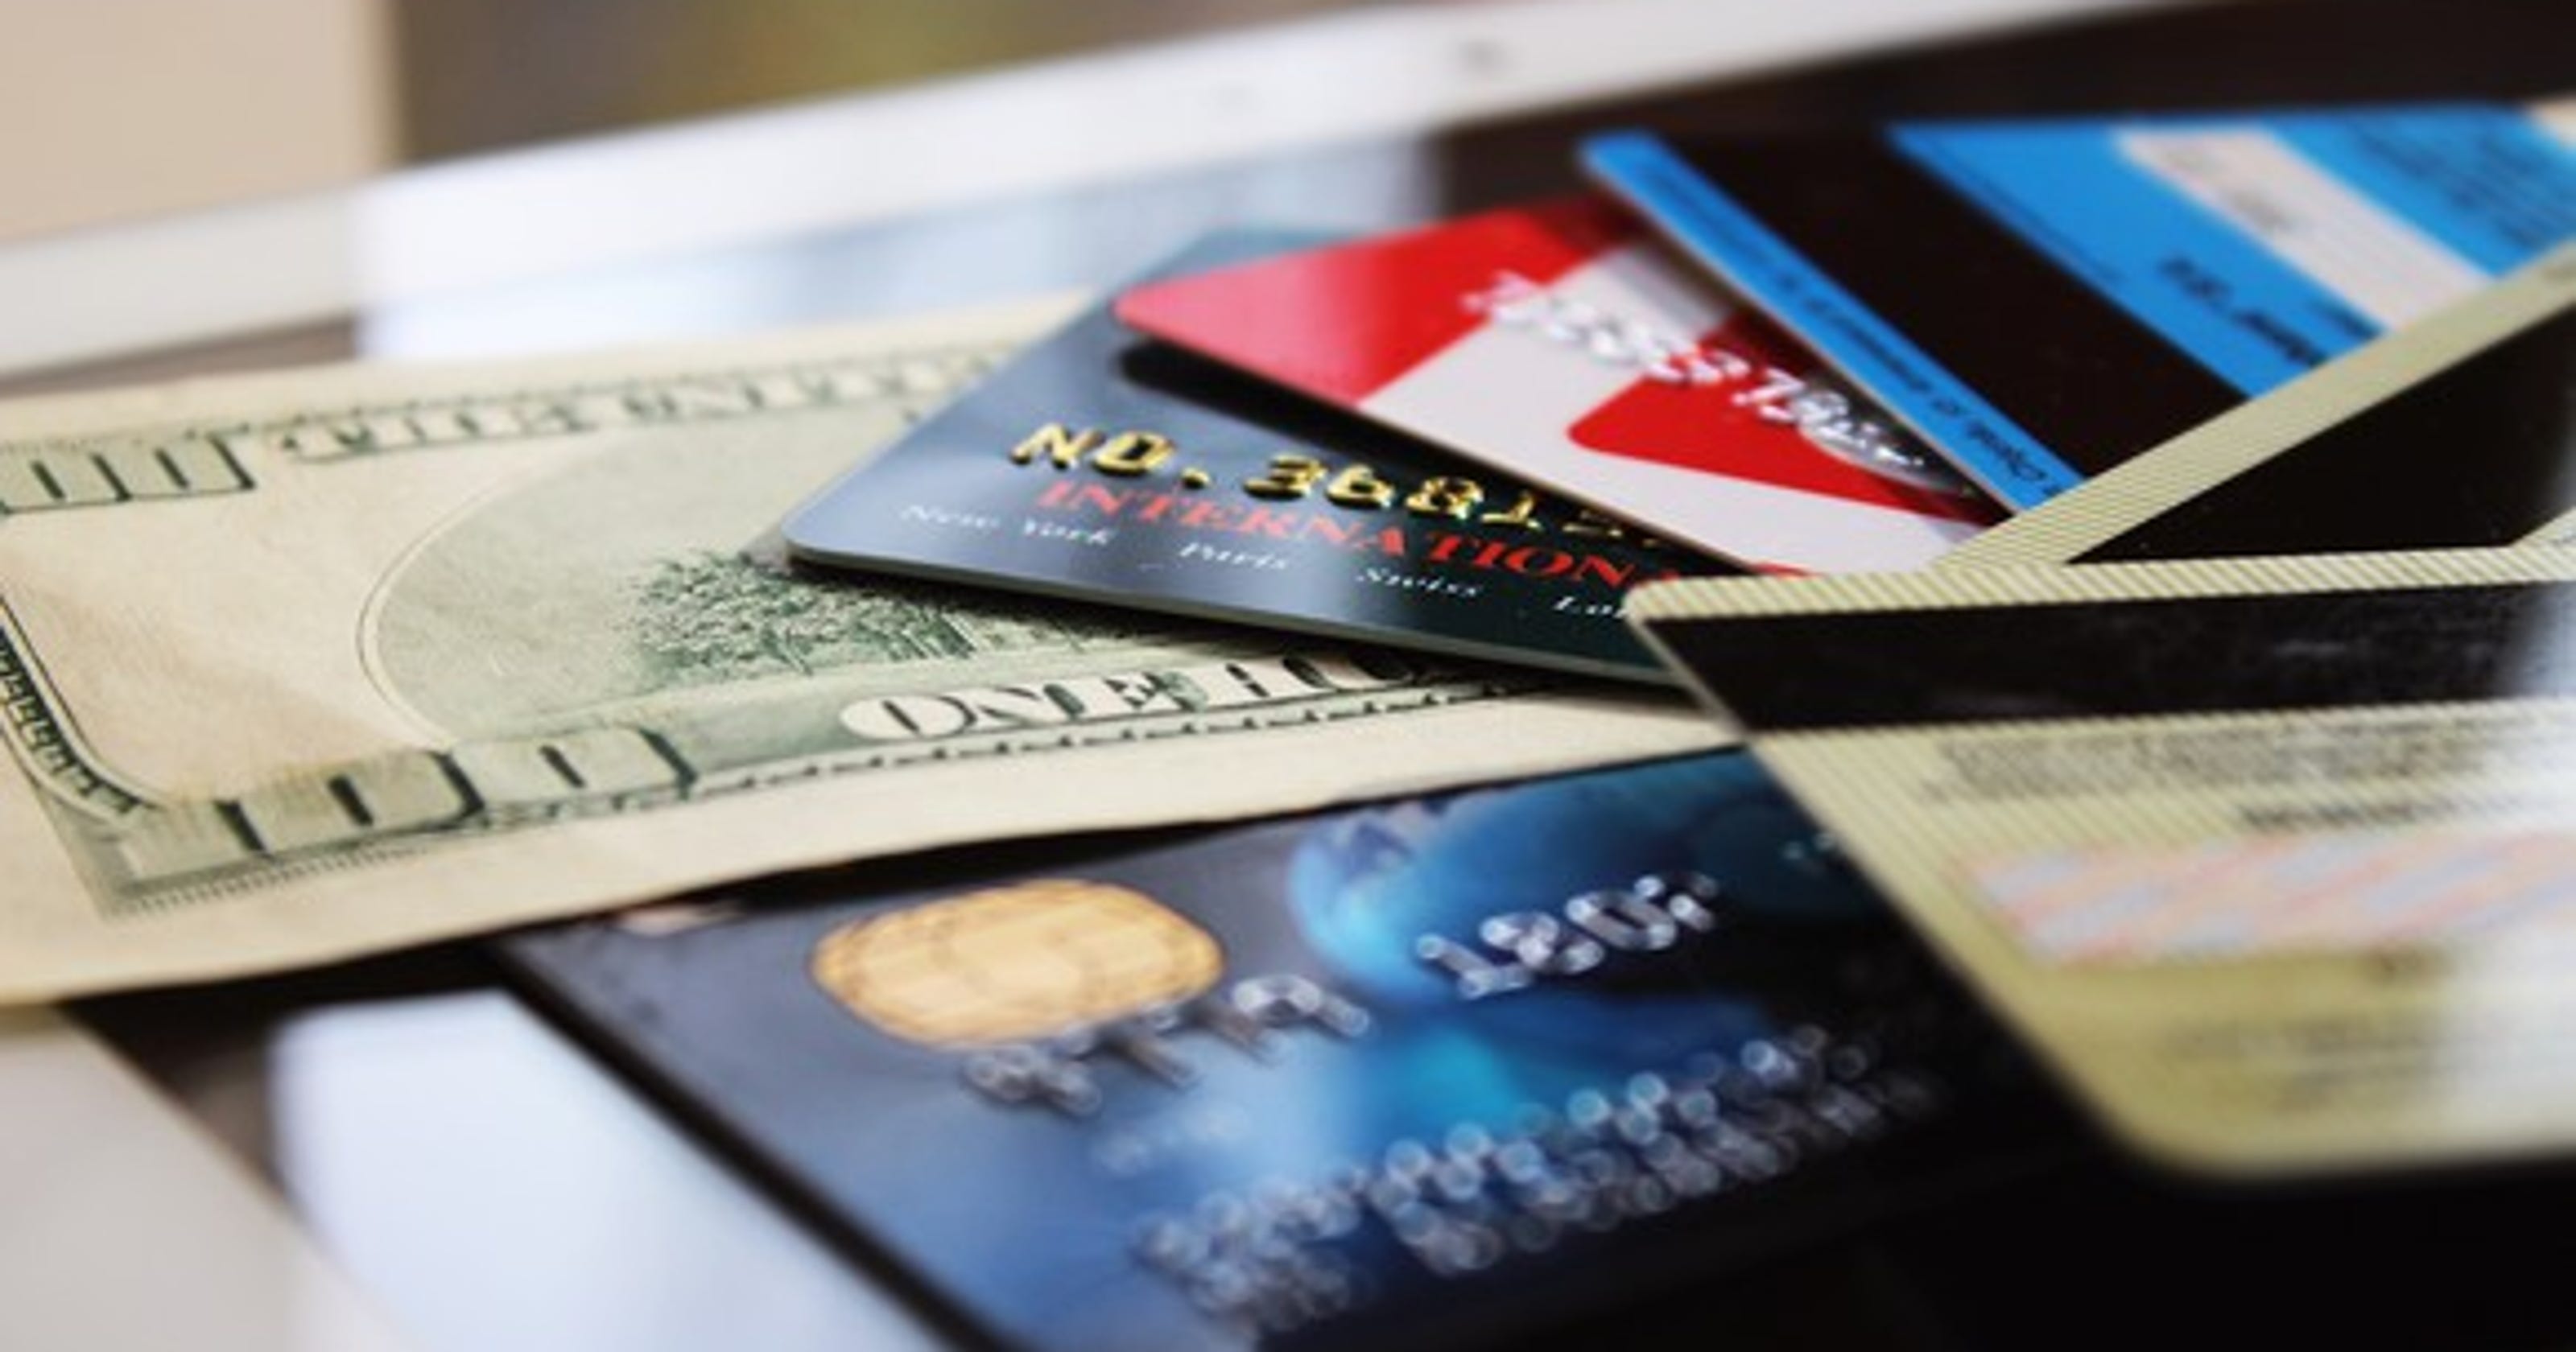 Does your spending personality match your credit cards?